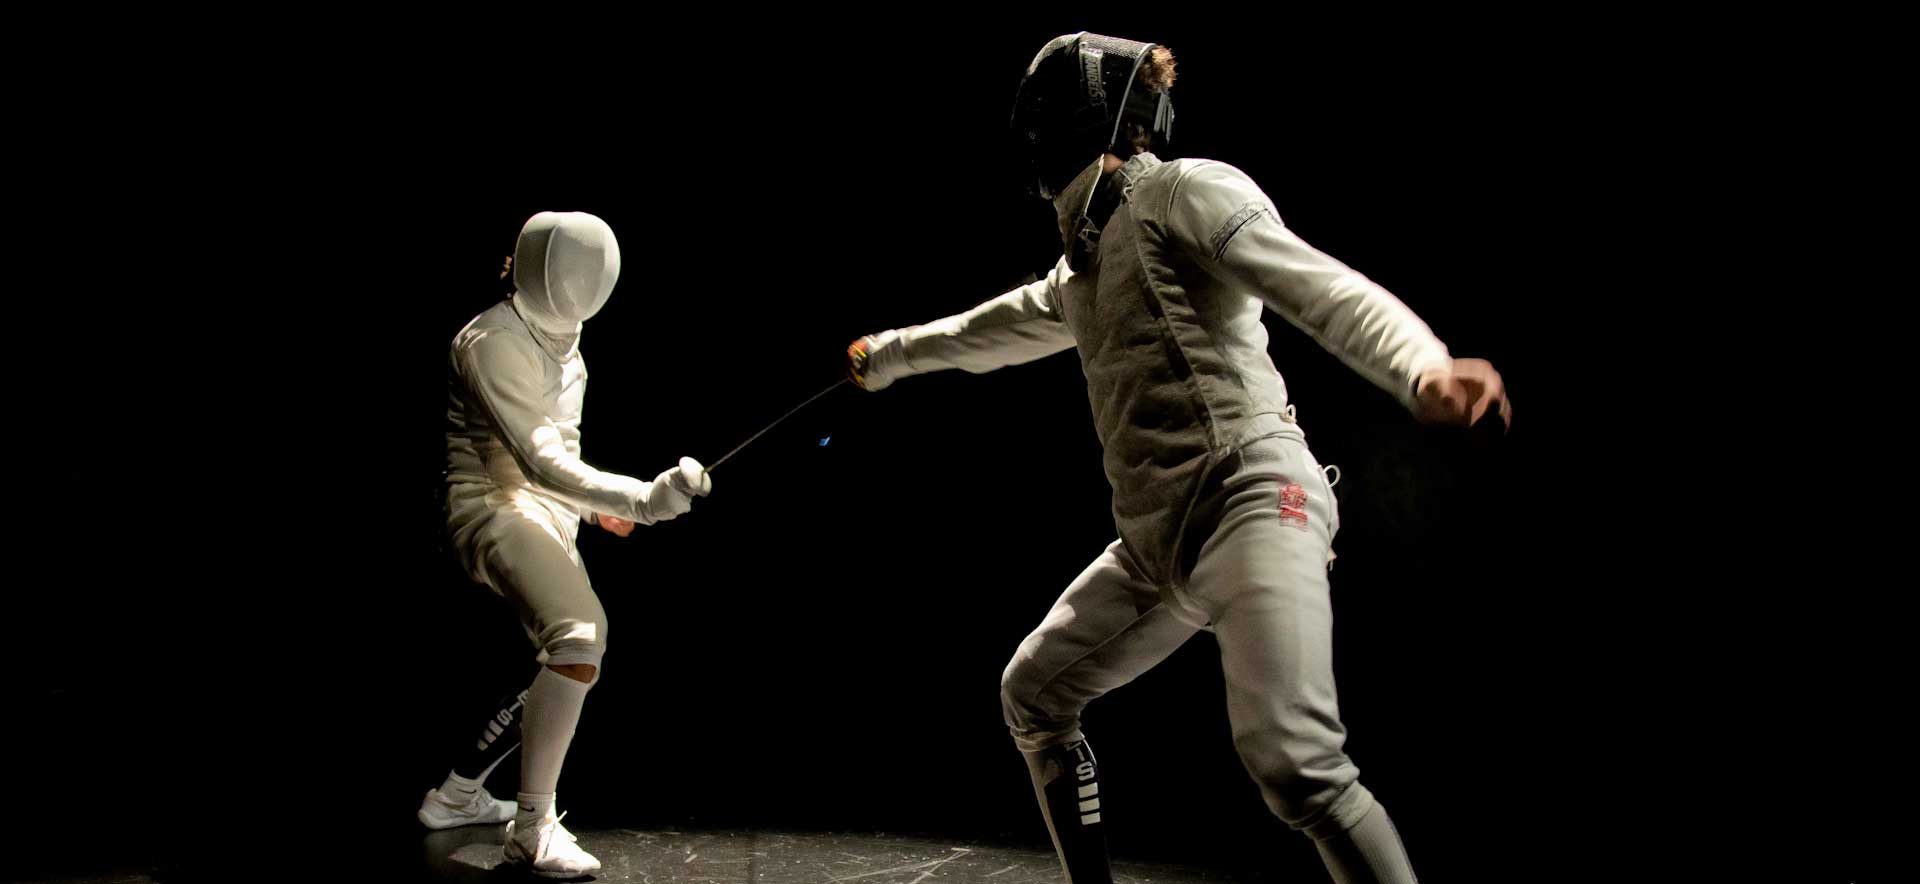 Two fencers dueling